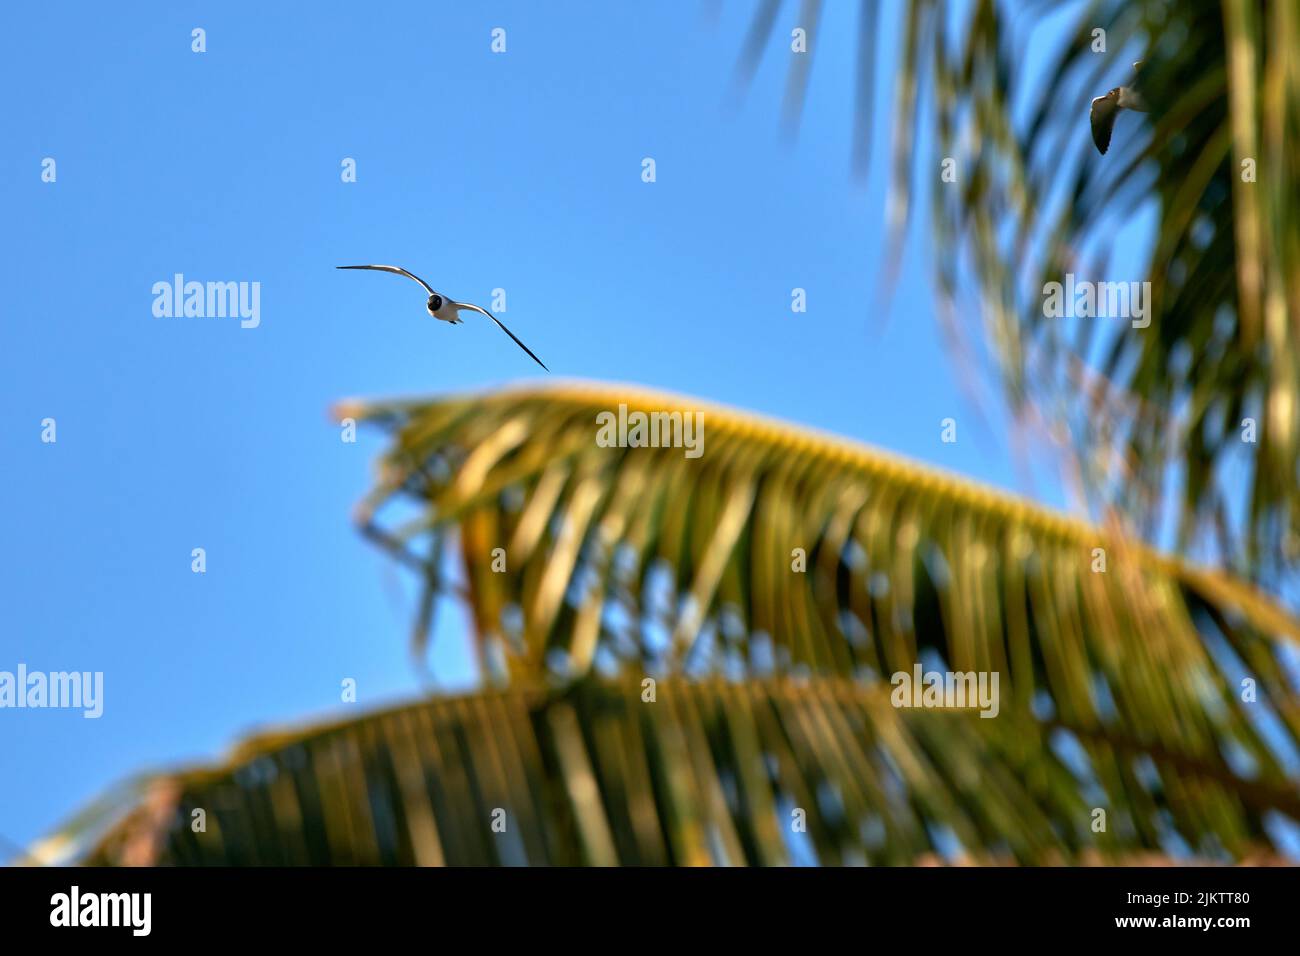 A selective focus shot of a seagull flying in the blue sky and palm tree leaves Stock Photo